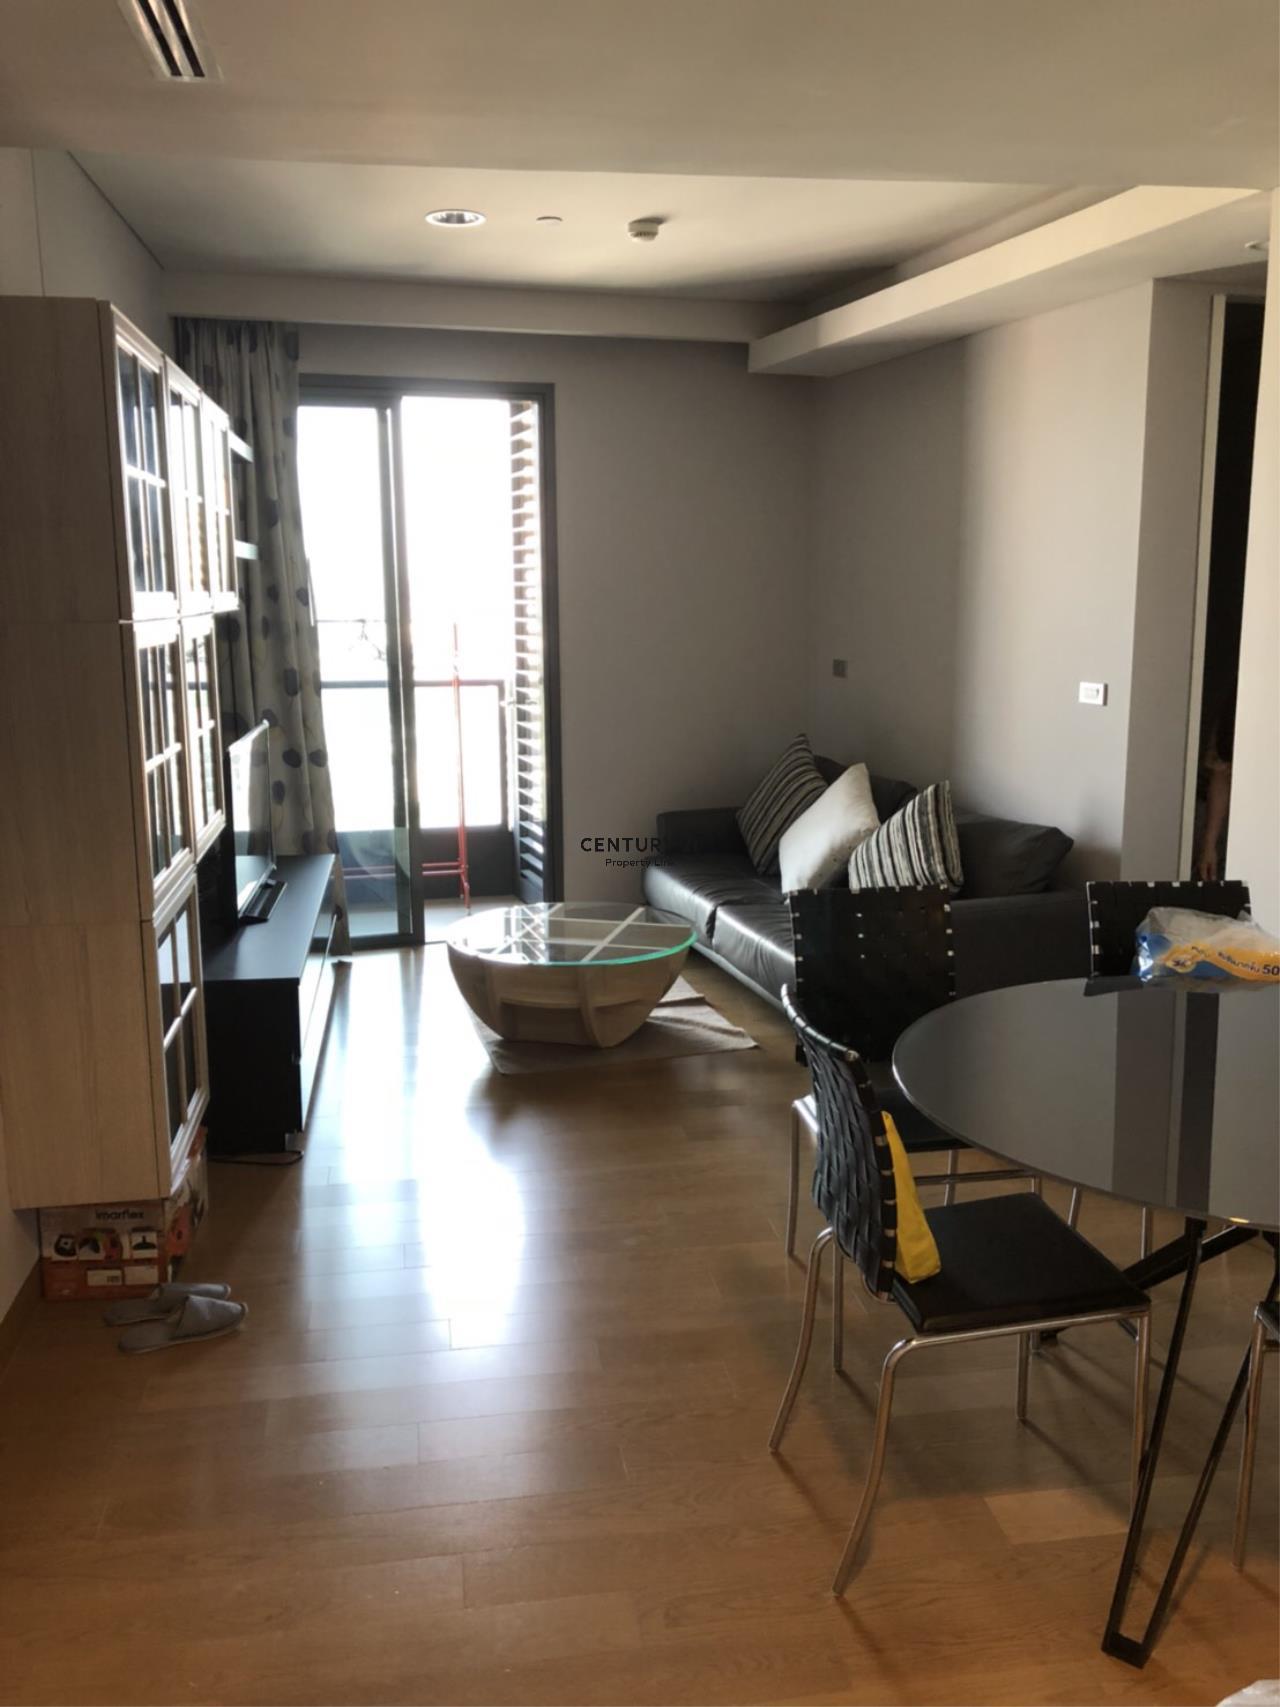 Century21 Property Link Agency's 39-CC-61467 The Lumpini 24 Room For Rent Near BTS Phrom phong Sukhumvit Road 2 Bedroom 50,000 THB./ Month 4